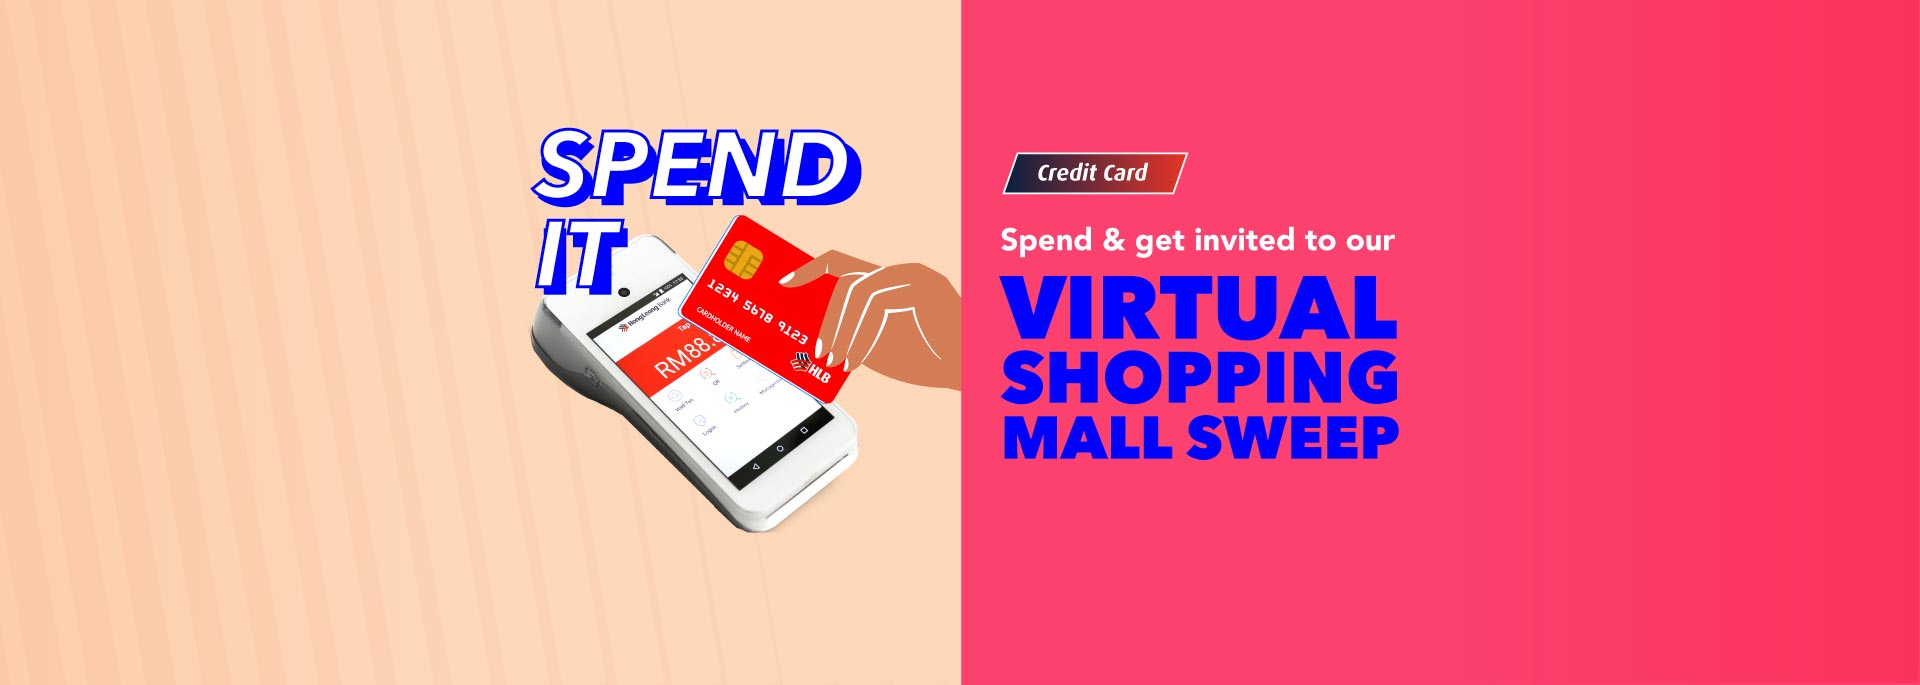 Spend & join a Virtual Shopping Mall Sweep!